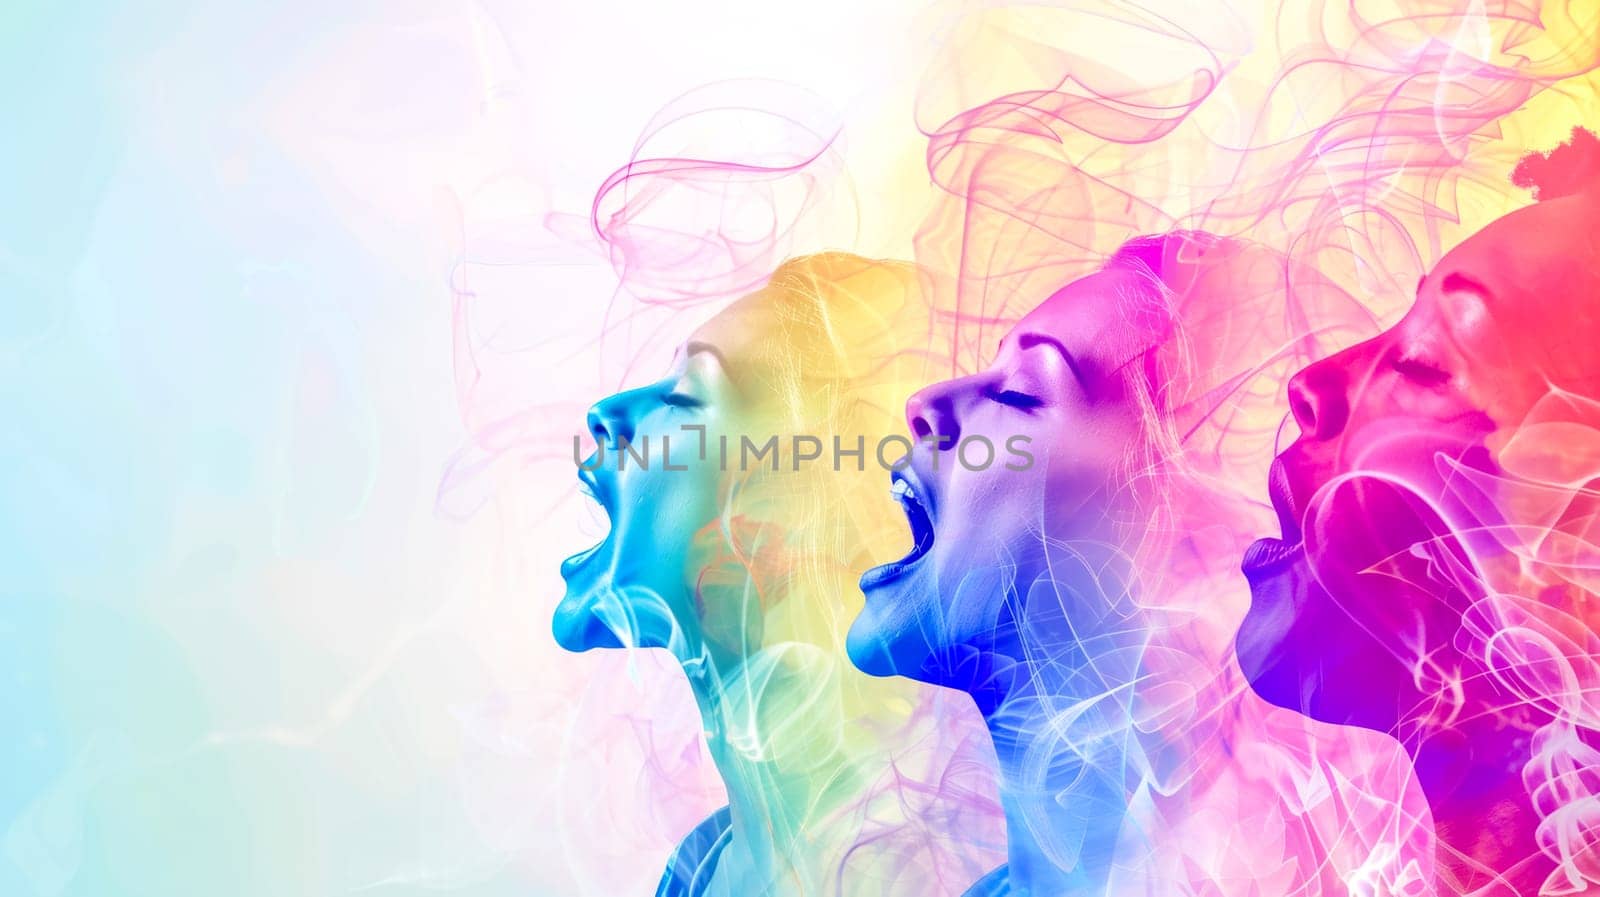 Artistic depiction of multiethnic individuals exuding happiness with a colorful abstract background